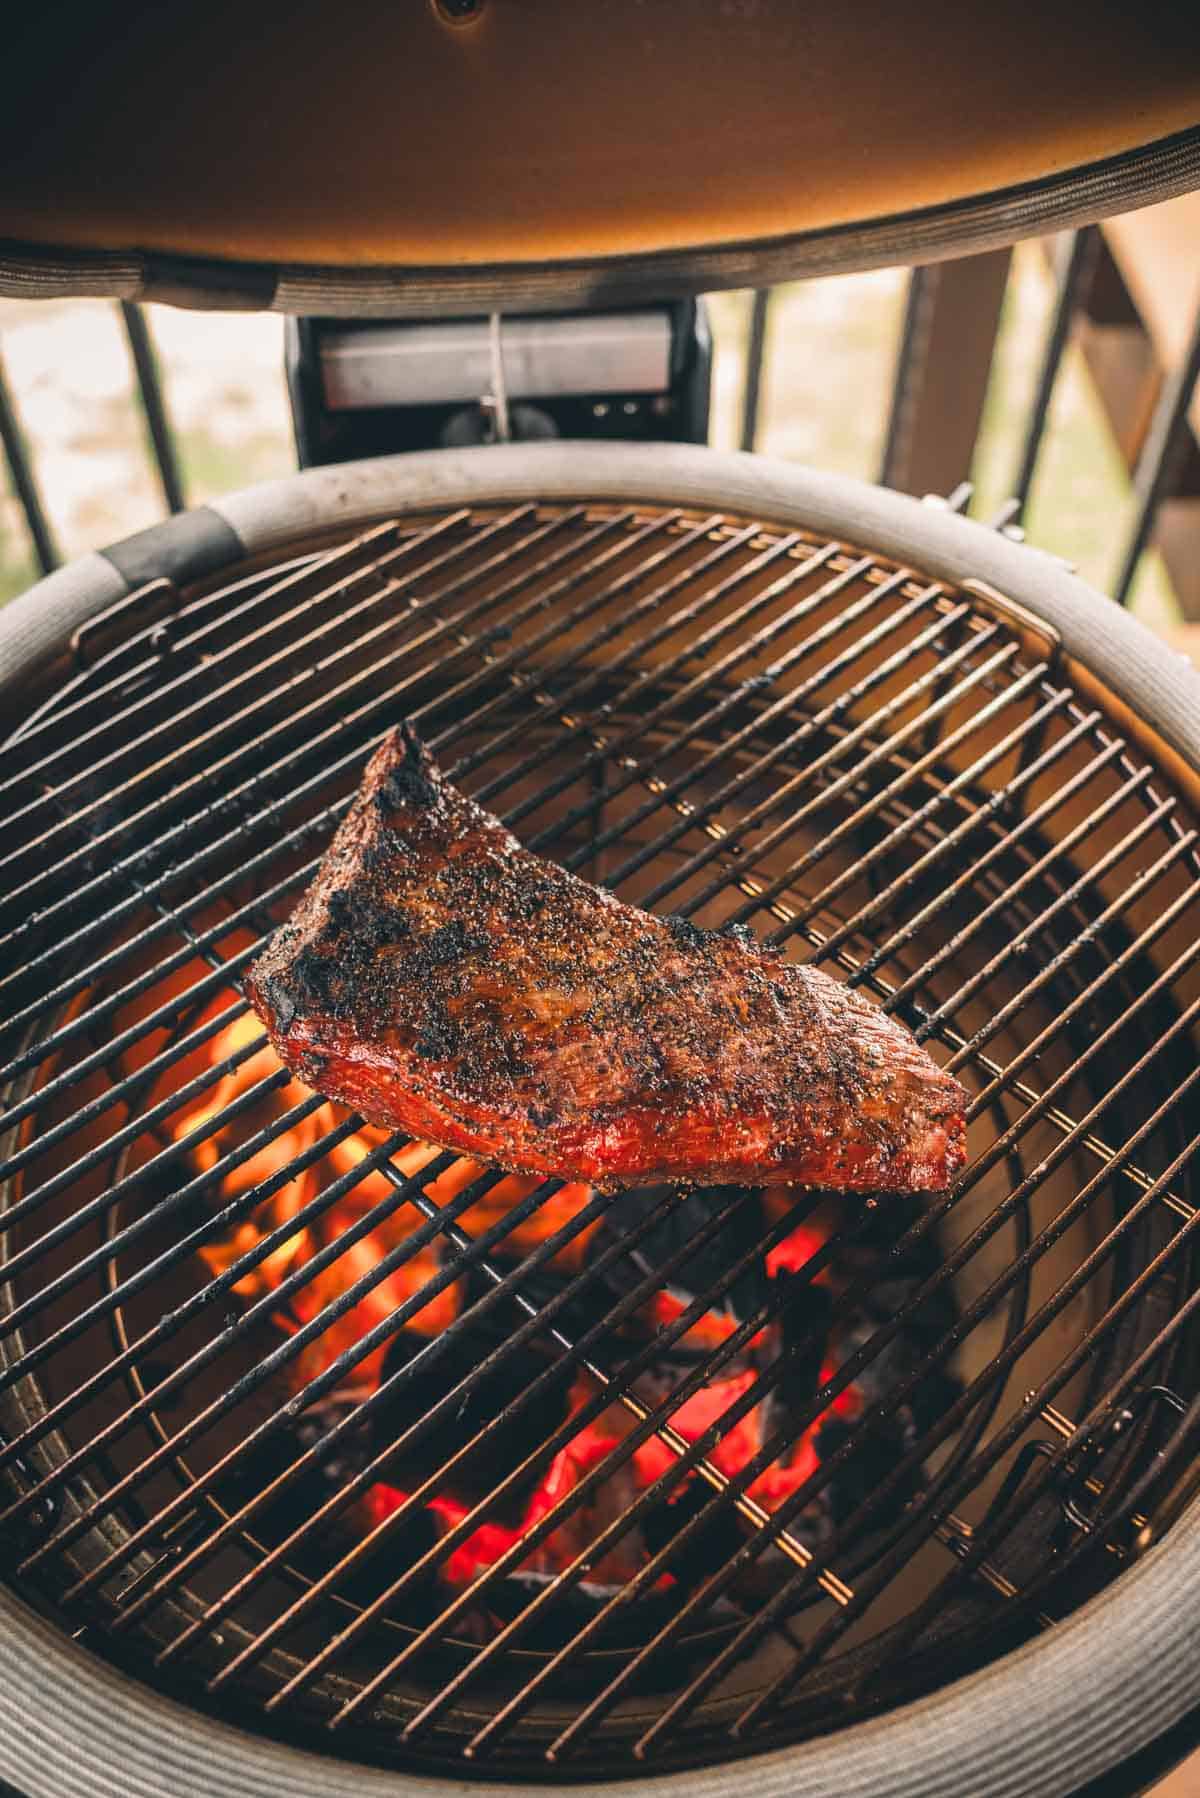 A tri-tip is being grilled on an outdoor barbecue grill, with visible flames and hot coals beneath the grill grates.